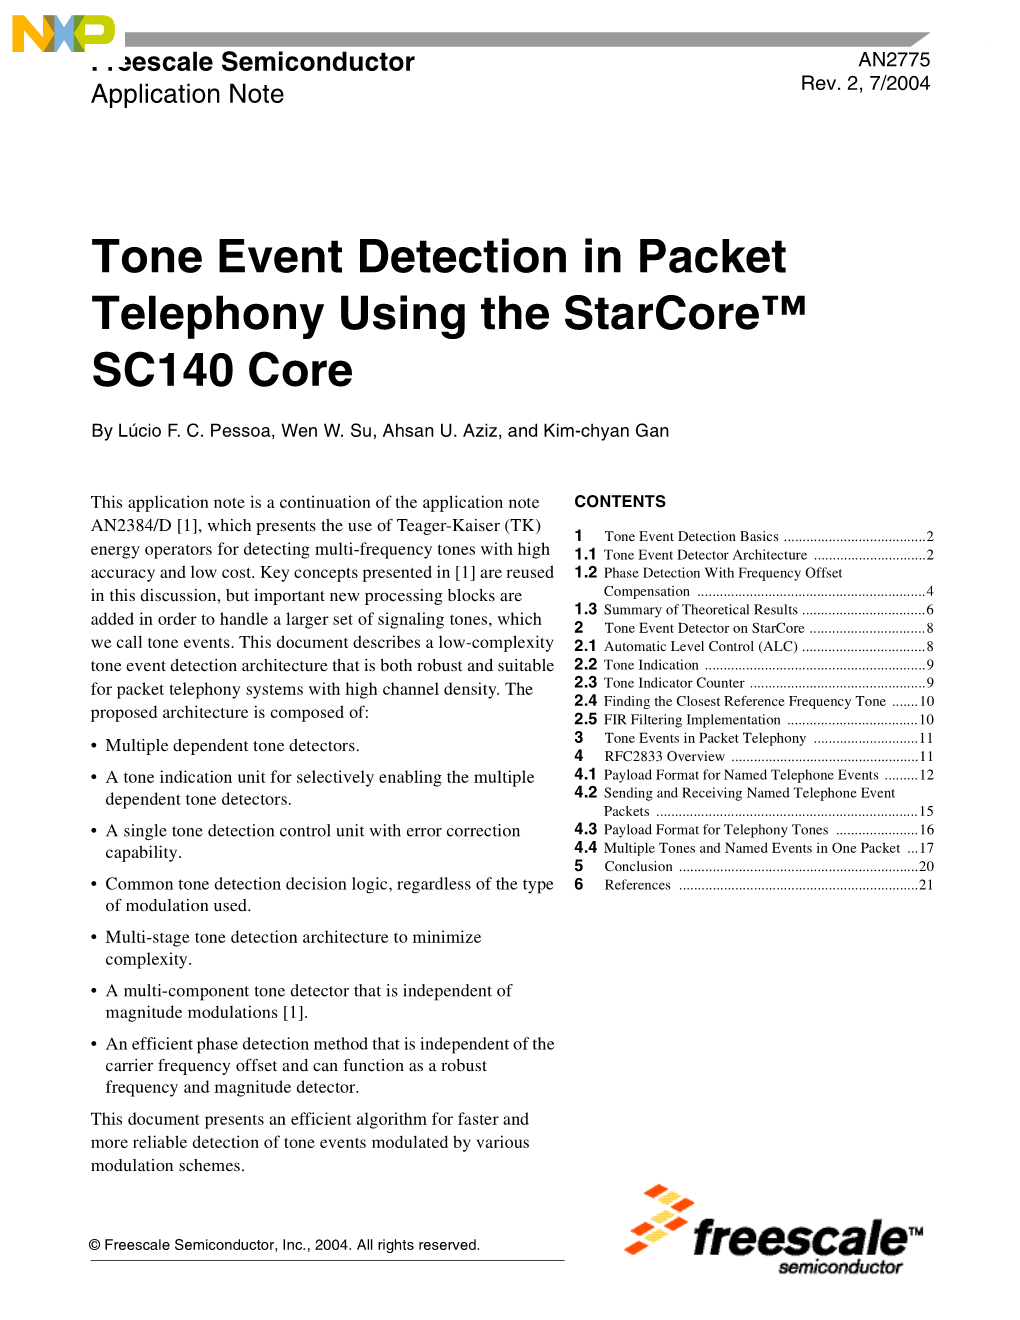 AN2775, Tone Event Detection in Packet Telephony Using The